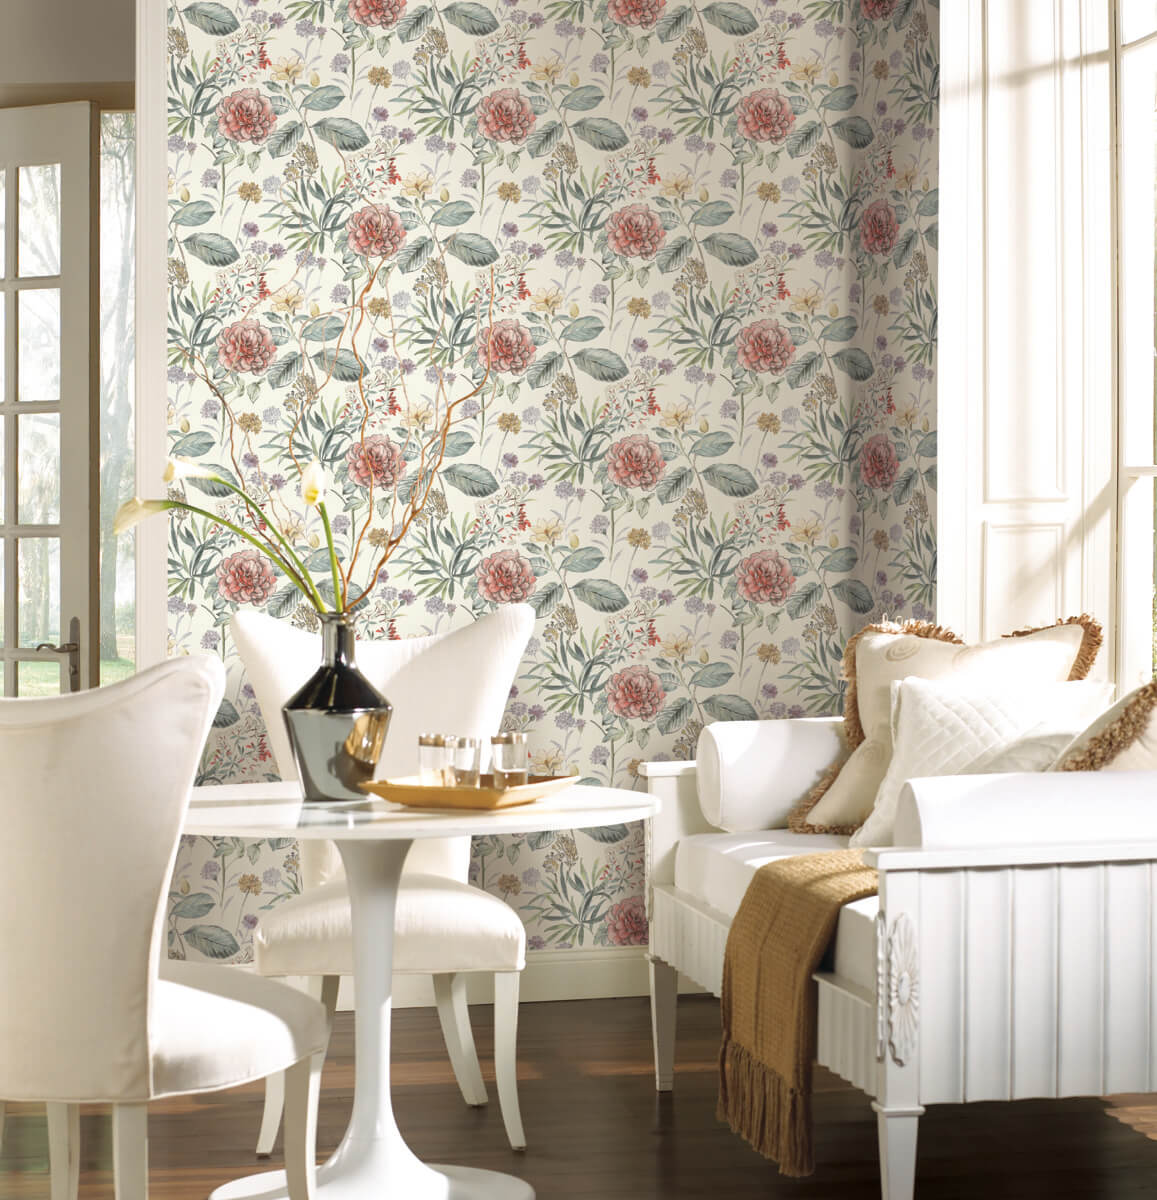 Handpainted Traditionals Midsummer Floral Wallpaper - Coral